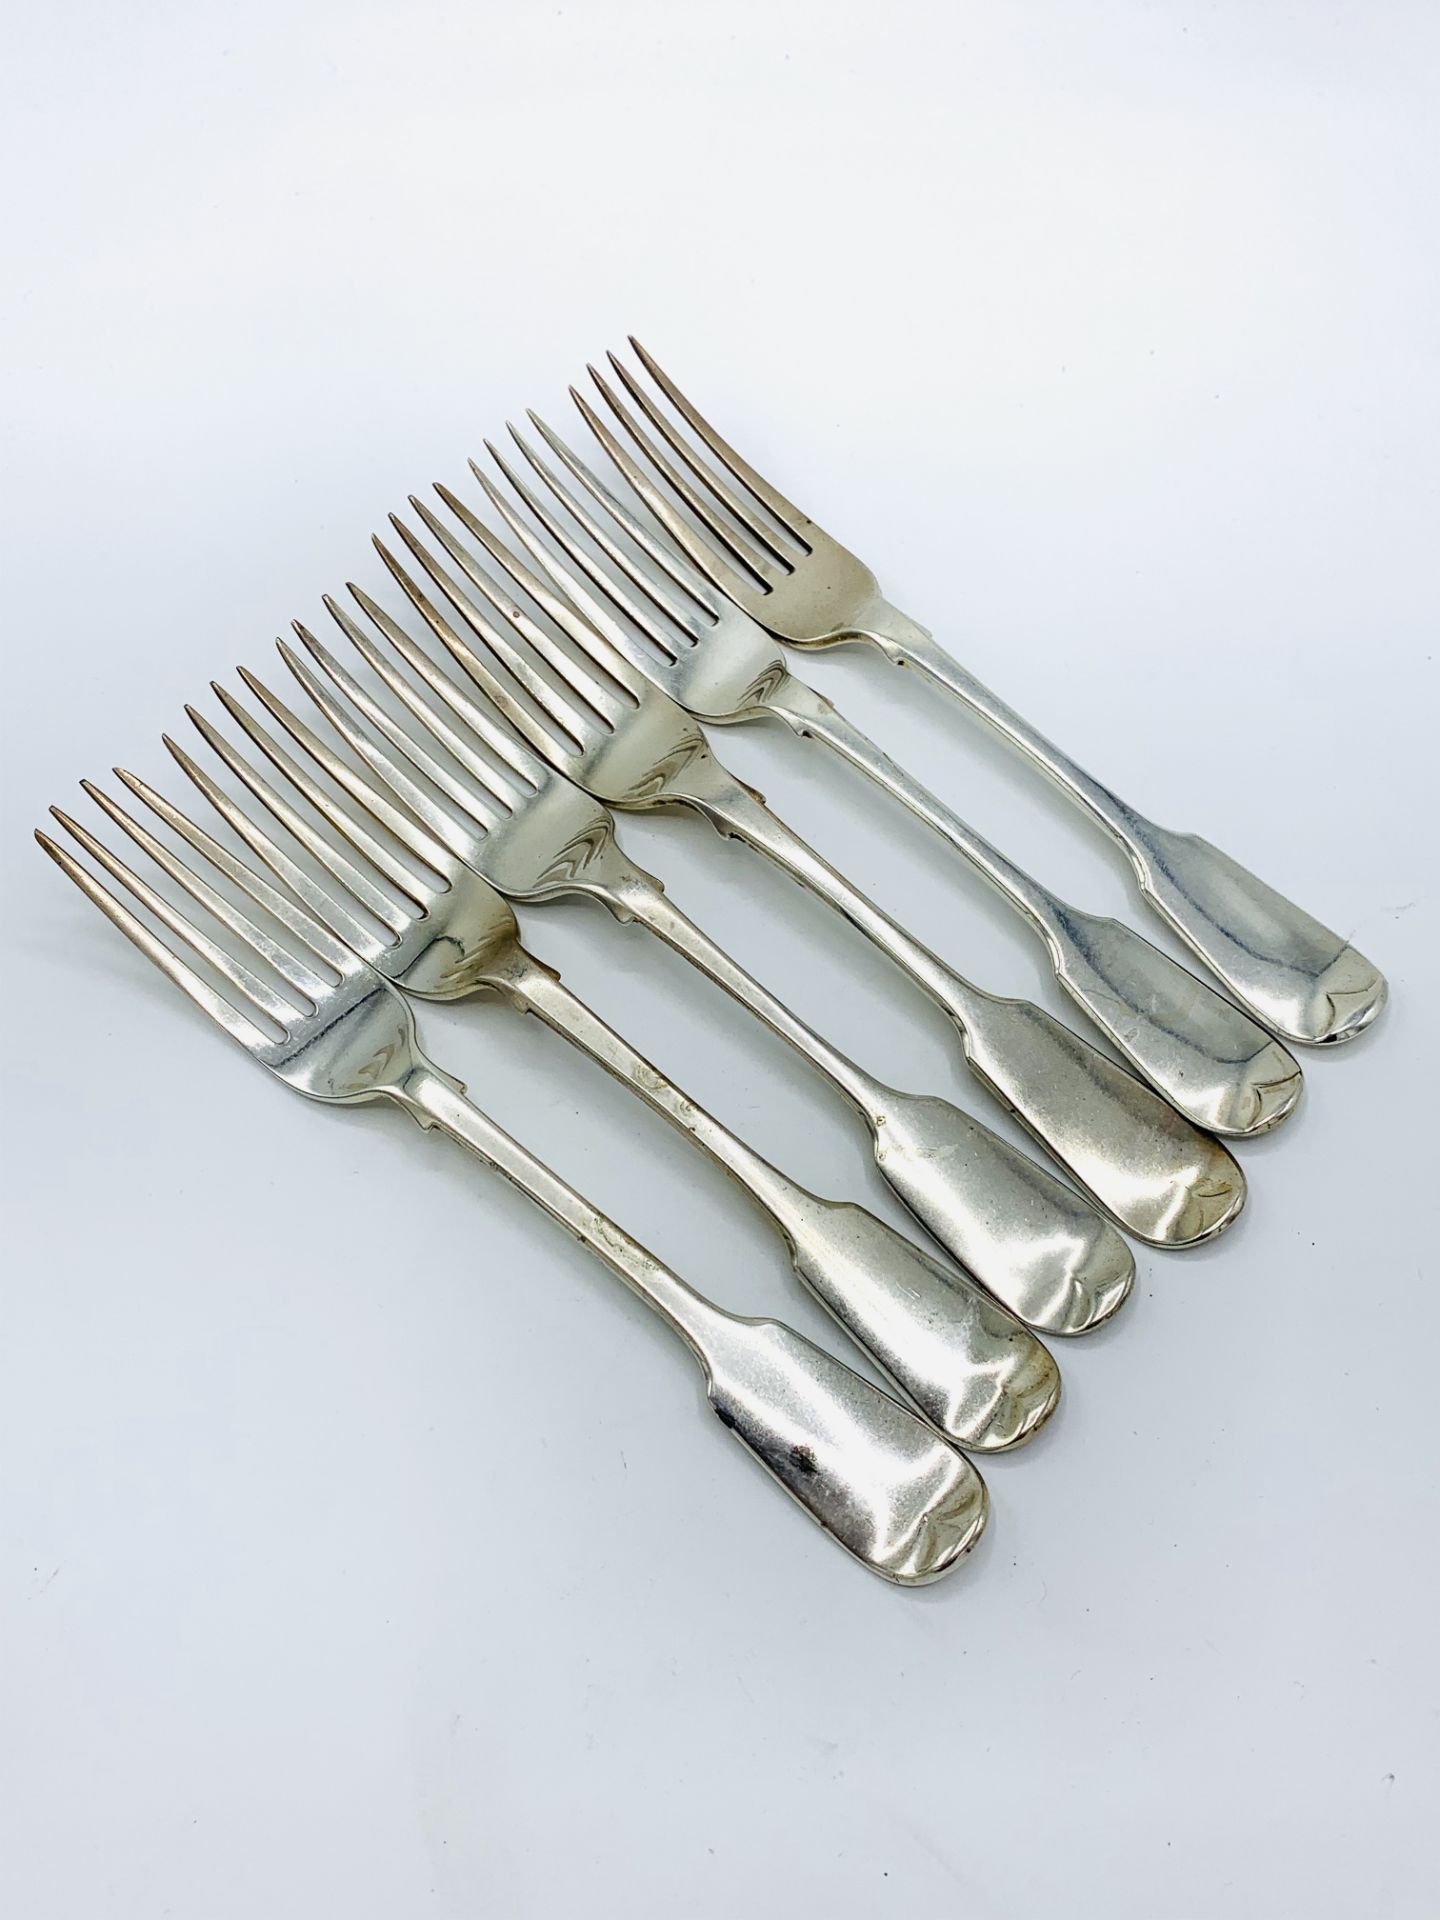 6 Victorian silver table forks - Image 2 of 2